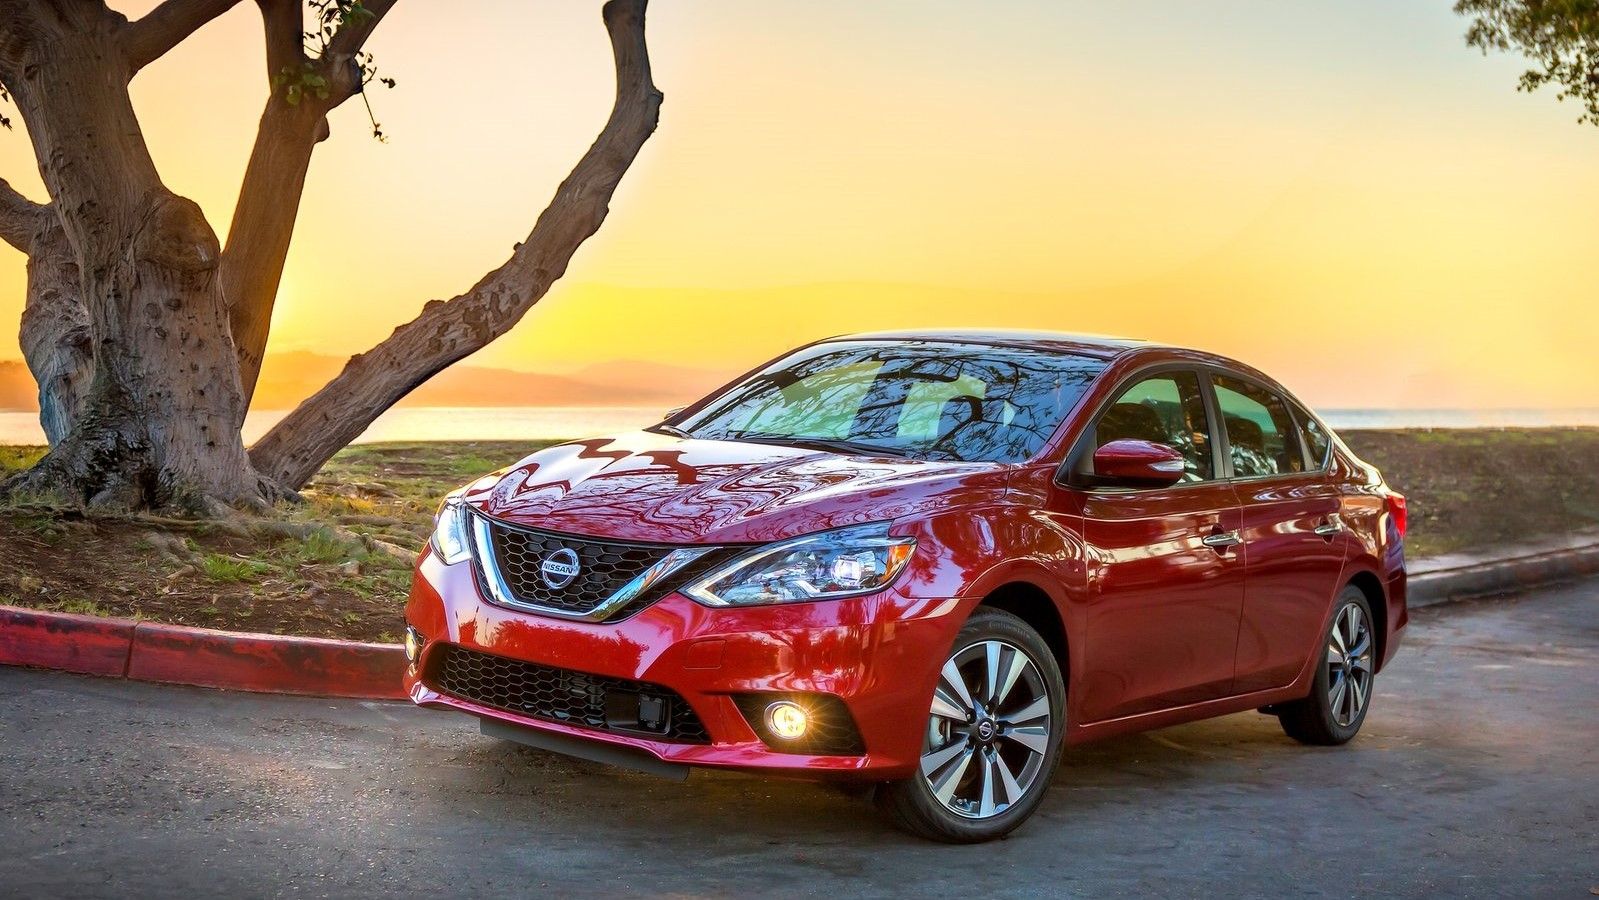 2016 Red Nissan Sentra on the road